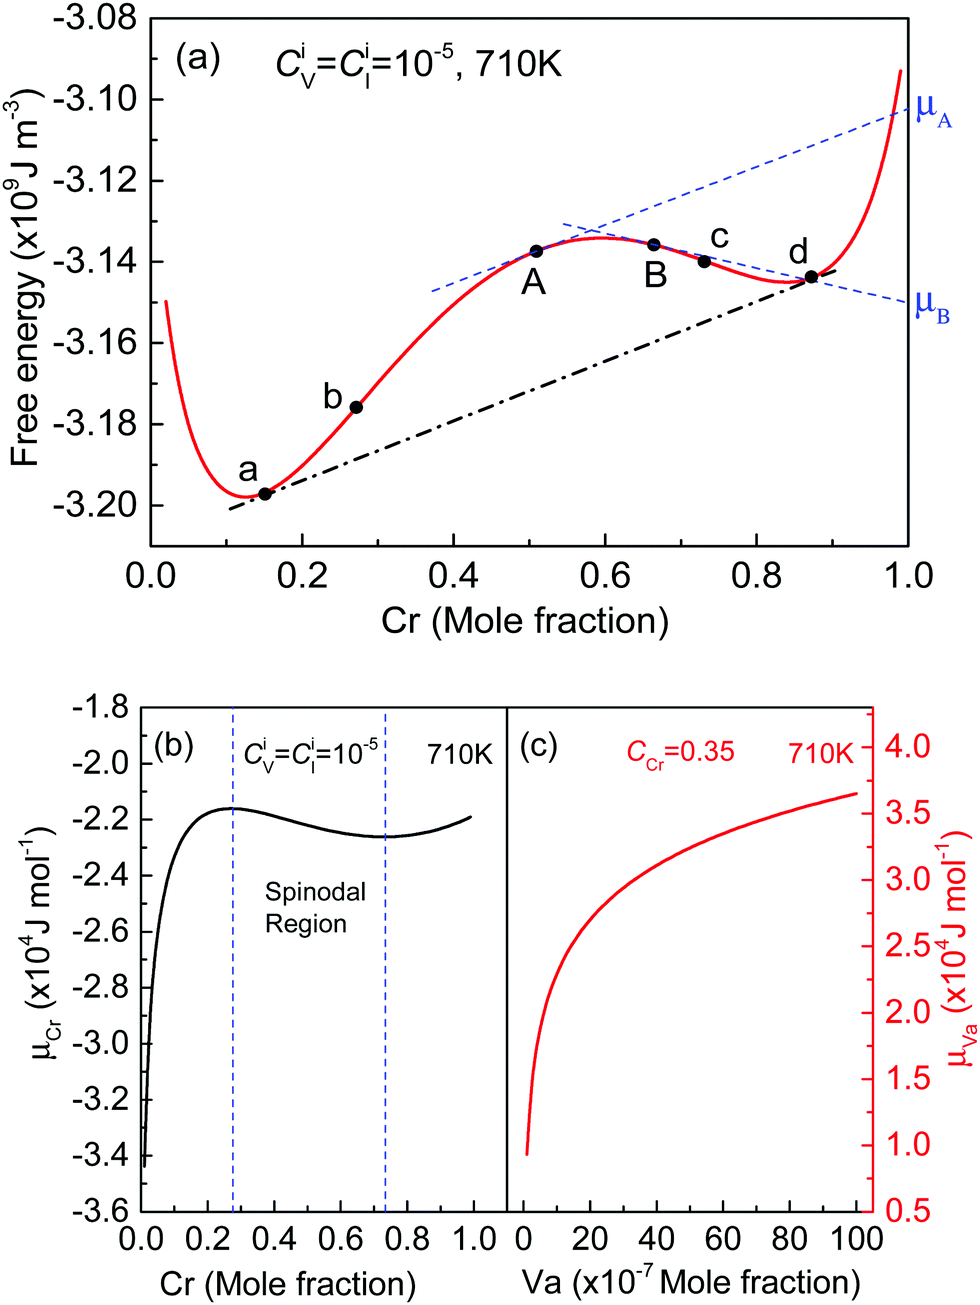 Vacancy And Interstitial Atom Evolution With The Separation Of The Nanoscale Phase In Fe Cr Alloys Phase Field Simulations Physical Chemistry Chemical Physics Rsc Publishing